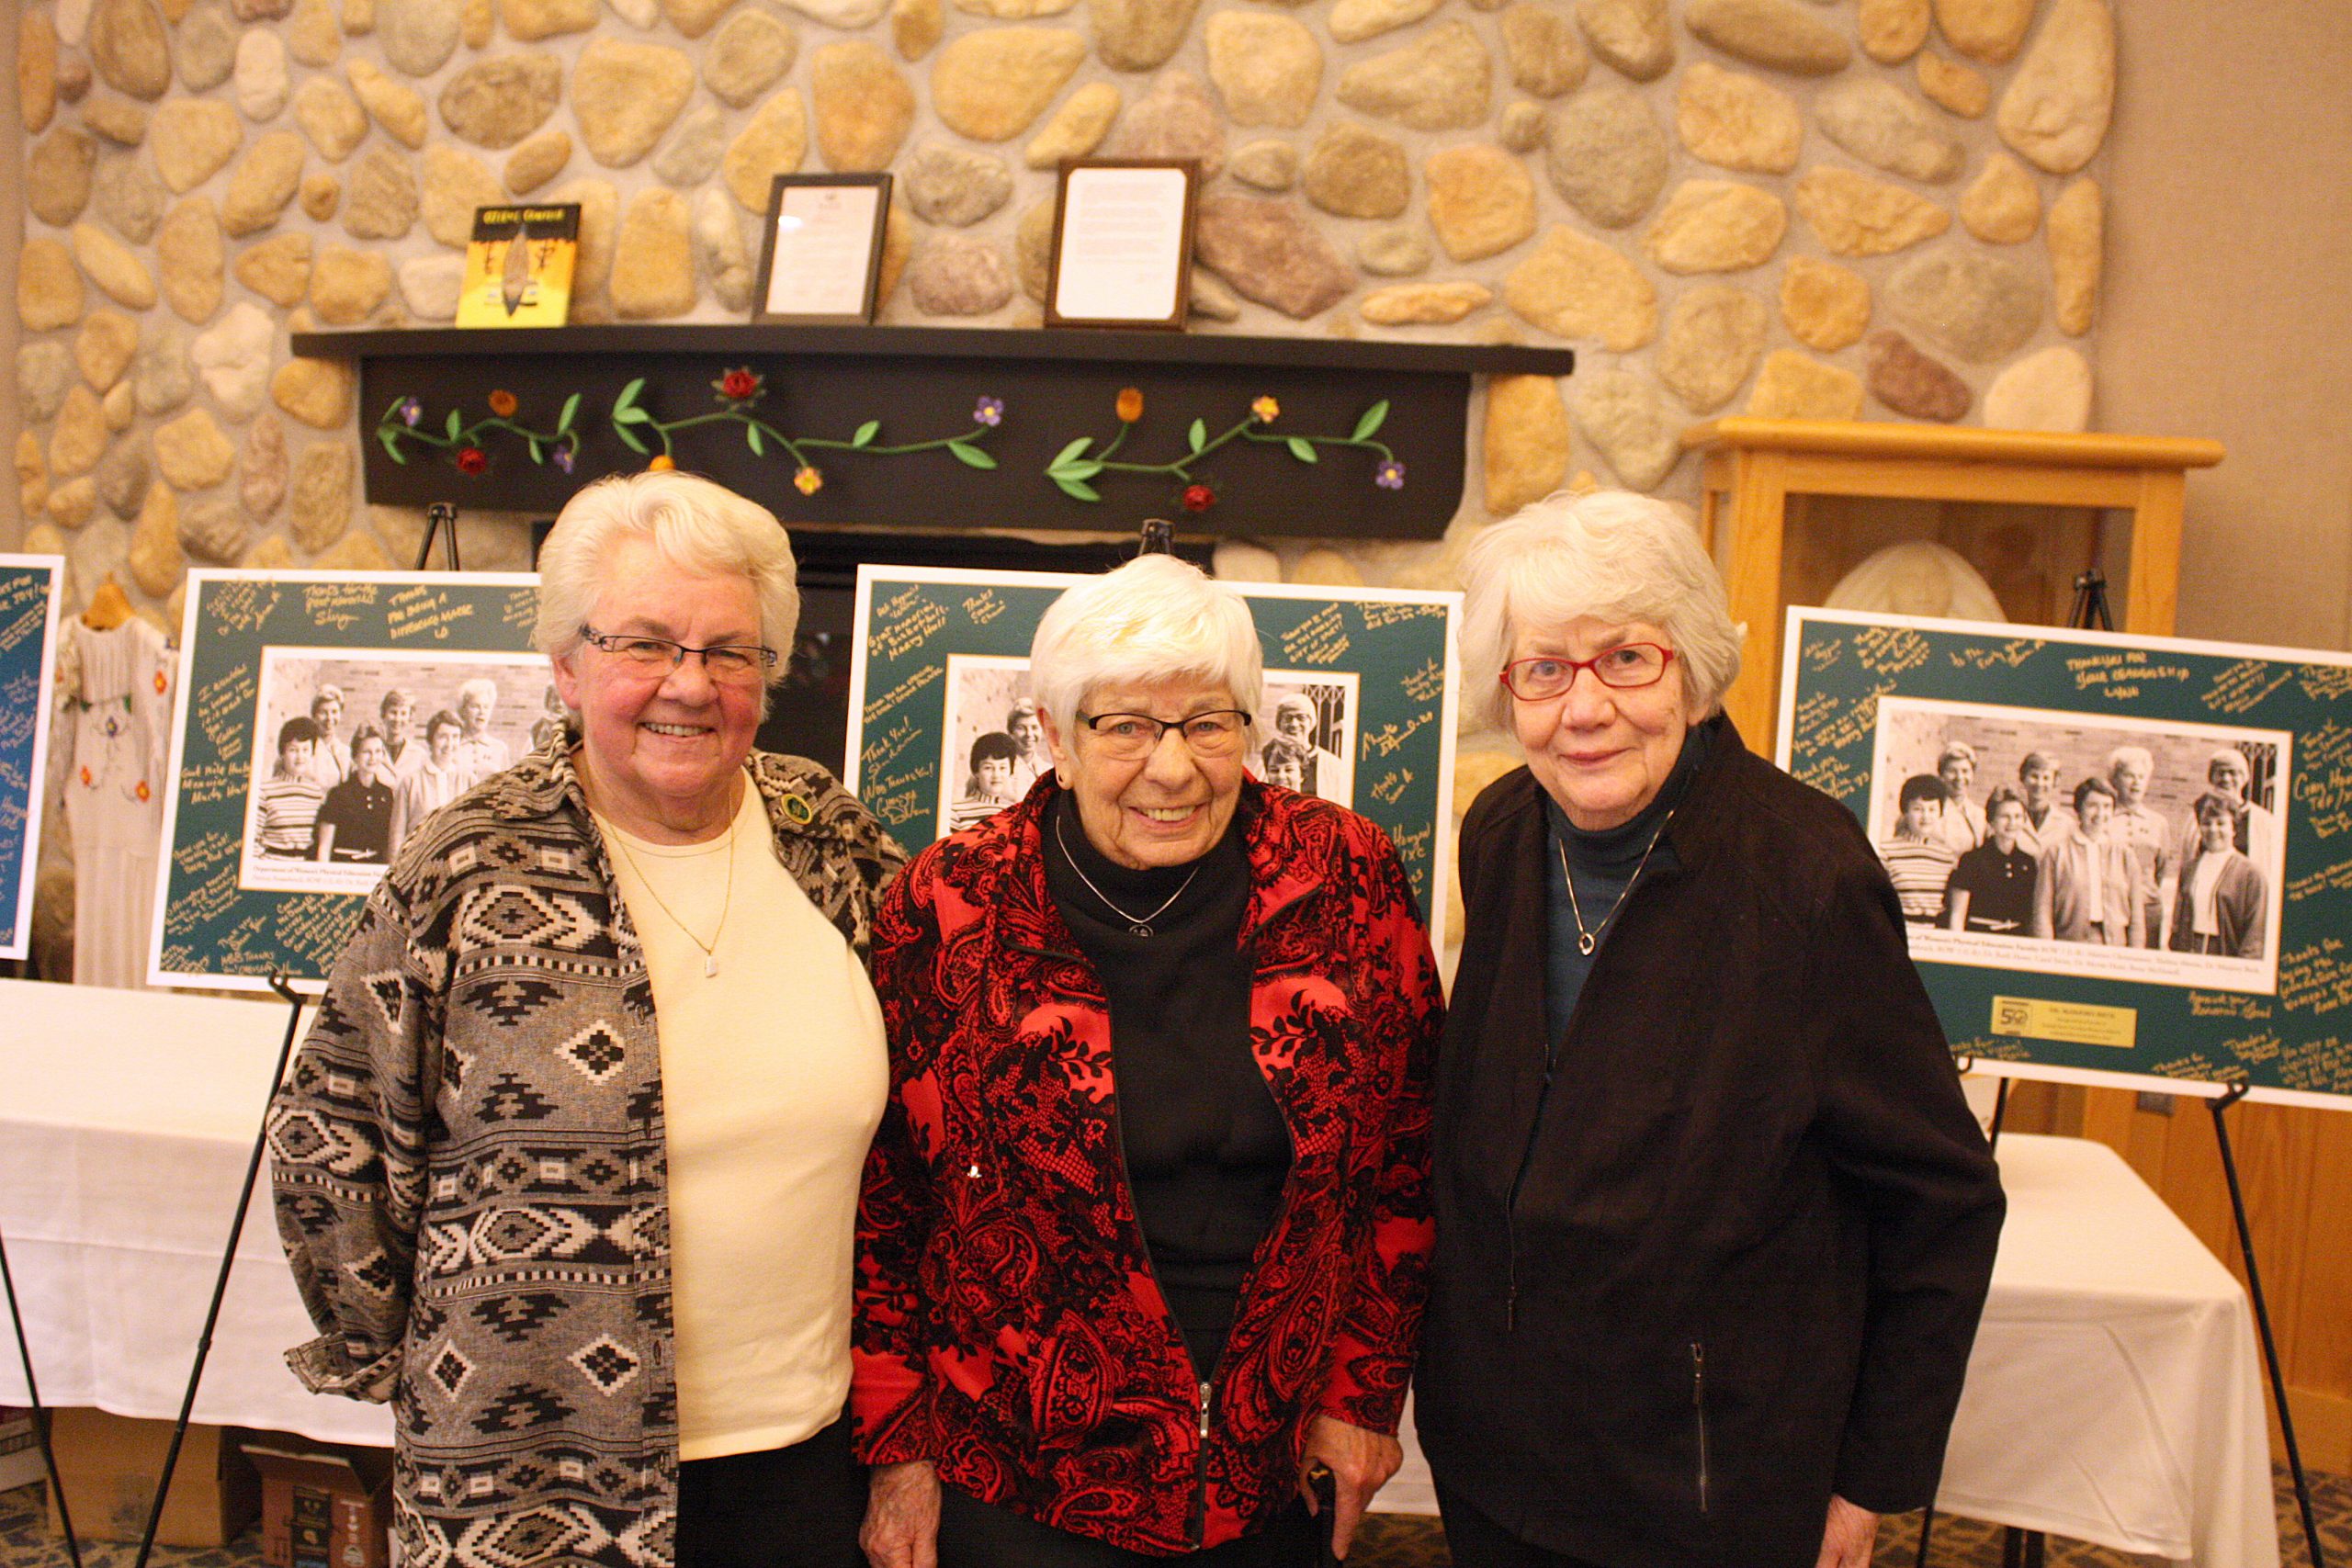 Dr. Pat Rosenbrock, Ruth Howe and Betsy McDowell were honored as pioneers of BSU women’s athletics — Howe and McDowell as founders and Rosenbrock as the program’s historian — at the October 2018 social to launch the year-long celebration of the 50th anniversary of women’s athletics.